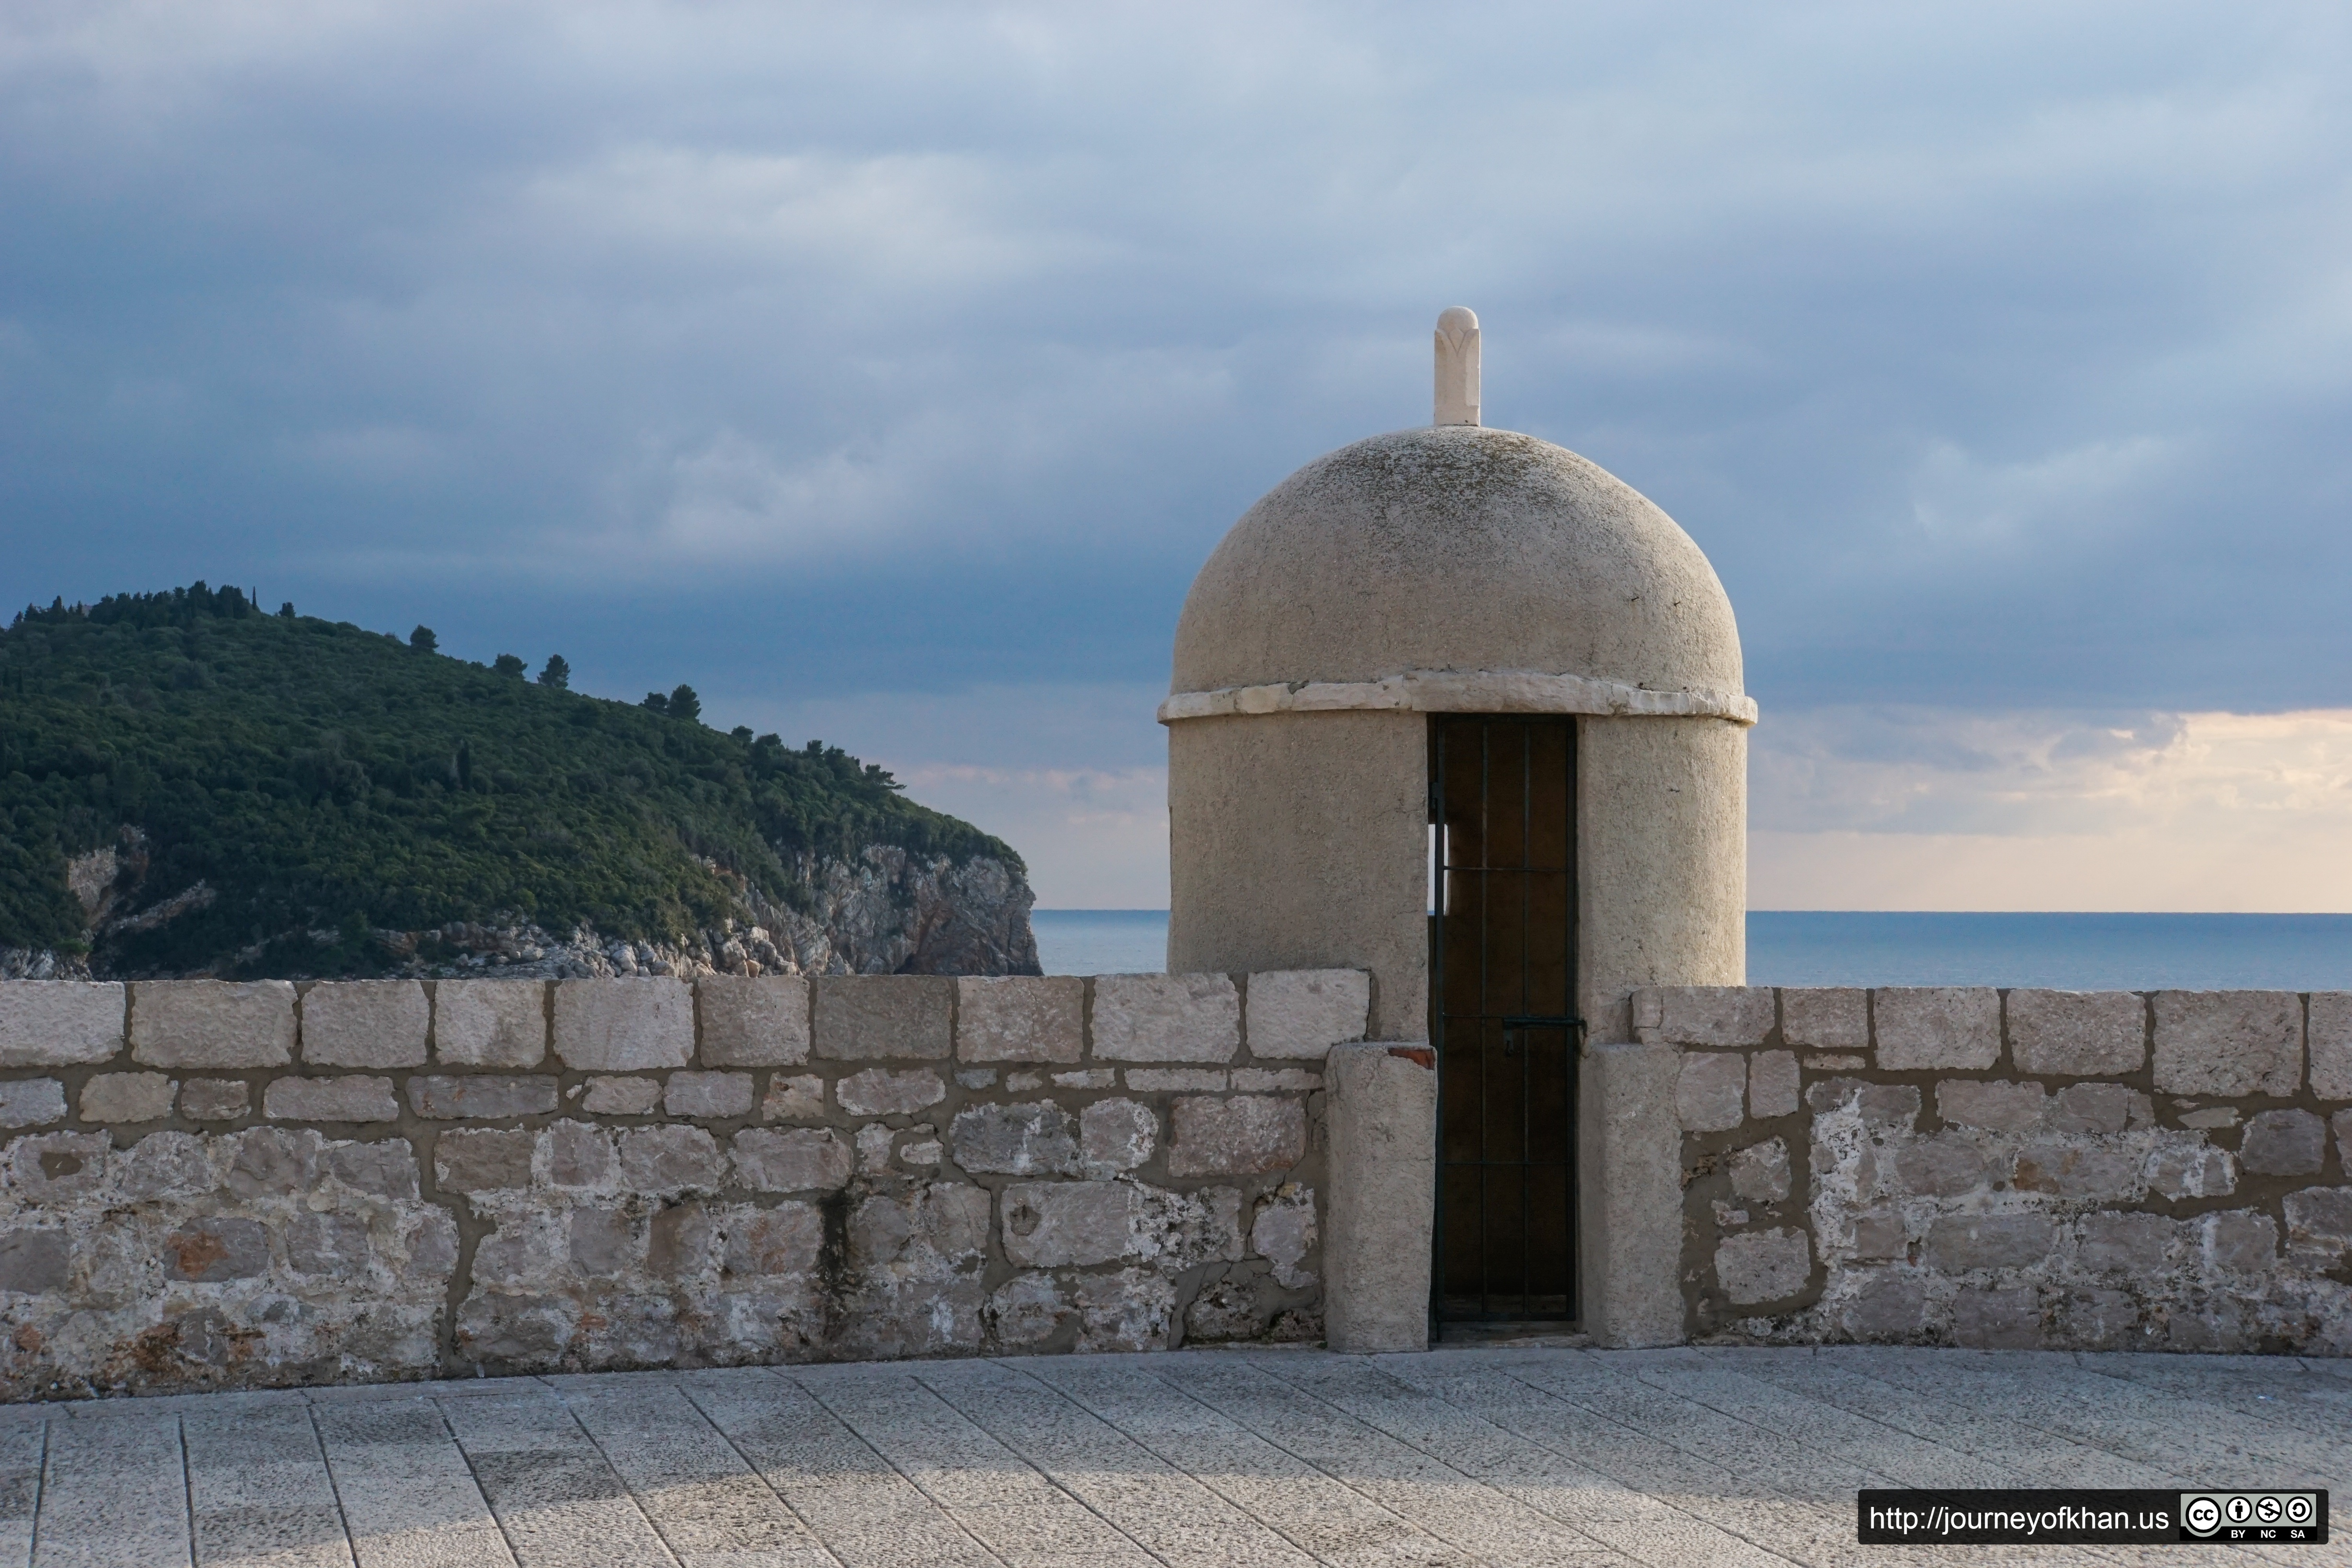 The Watchman of Dubrovnik (High Resolution)